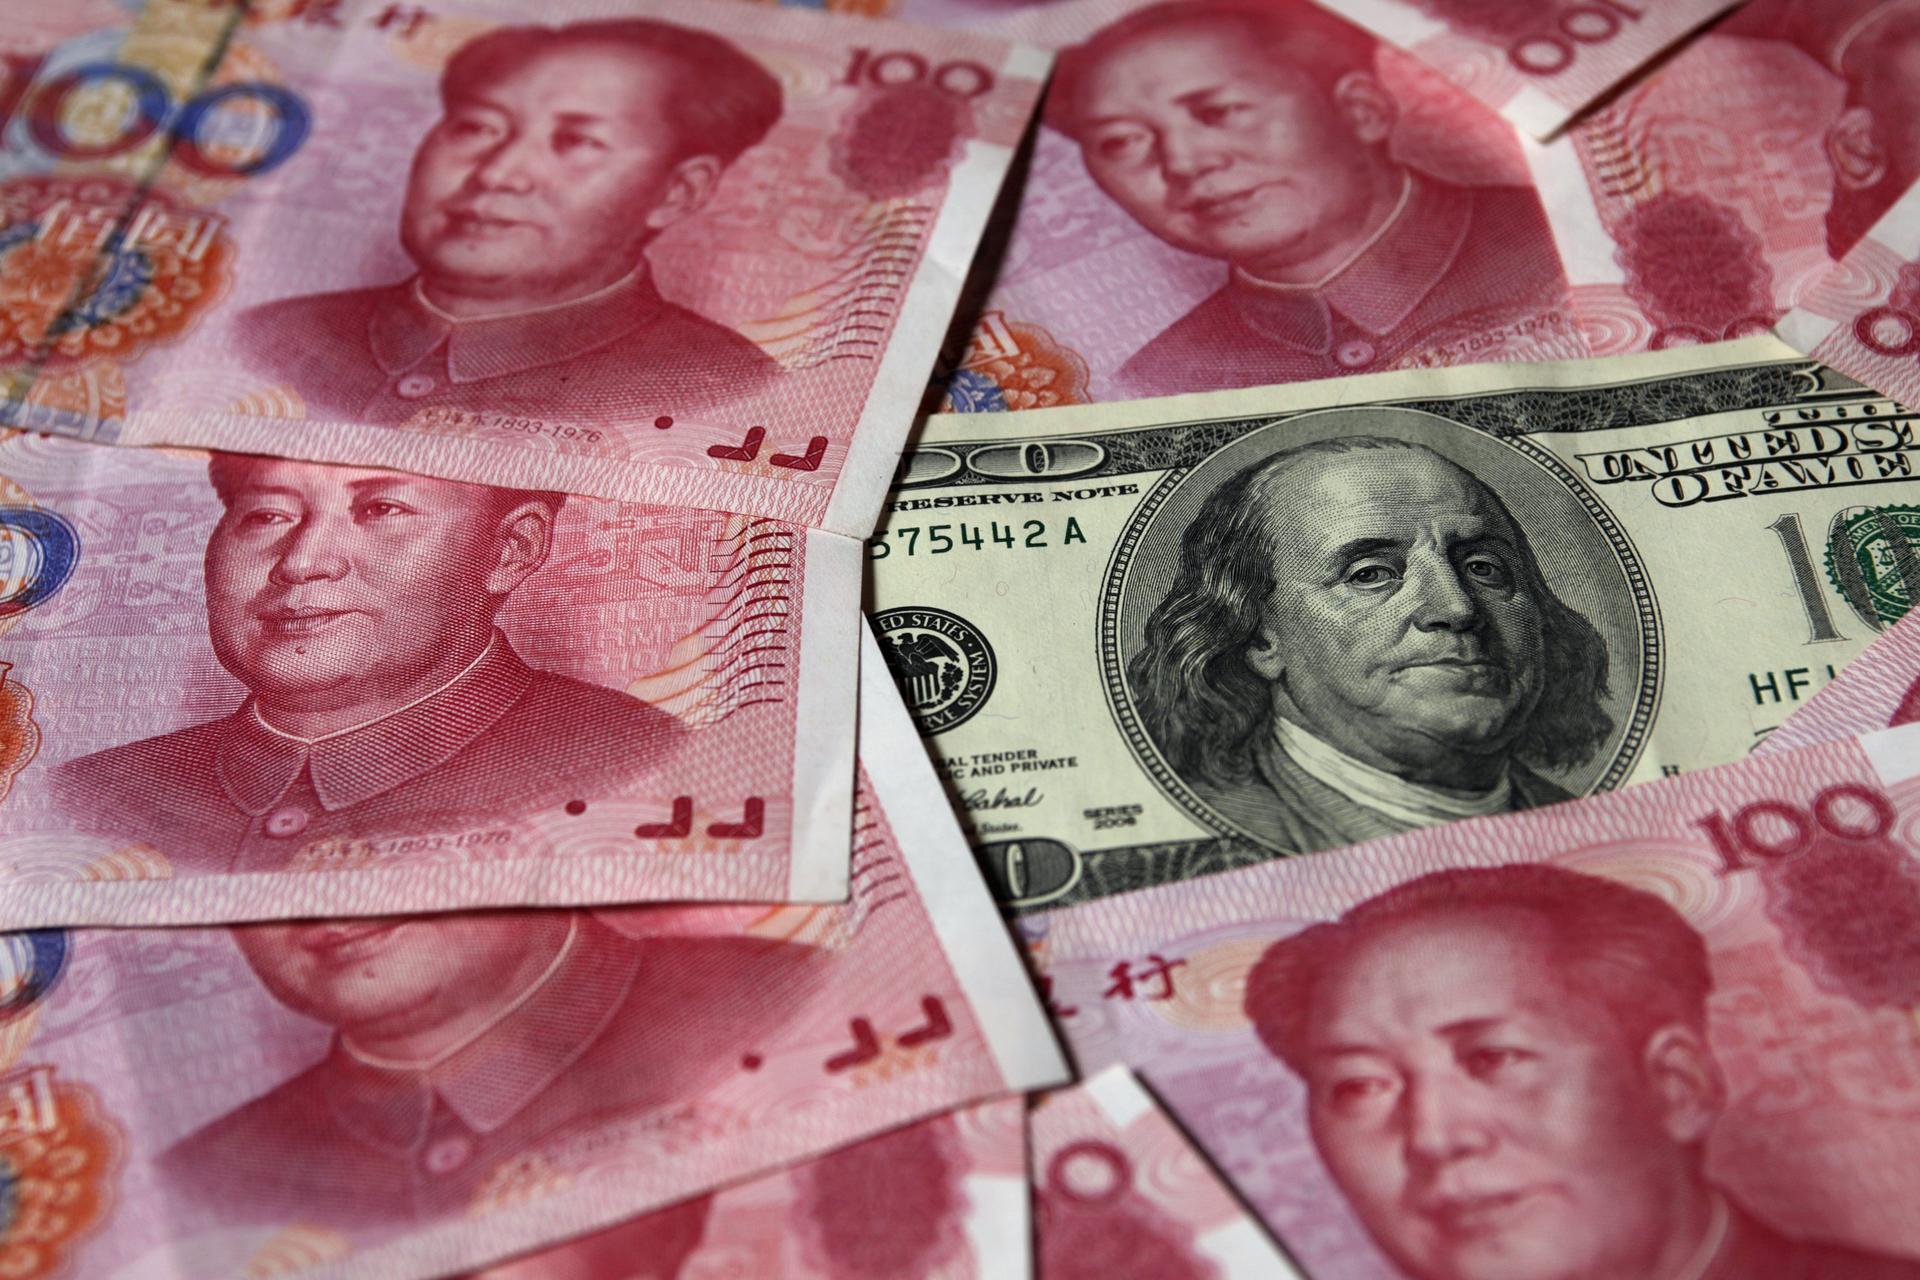 For the yuan to overtake the US dollar as a major world currency, Beijing has to make far-reaching reforms to its capital controls. Photo: Reuters